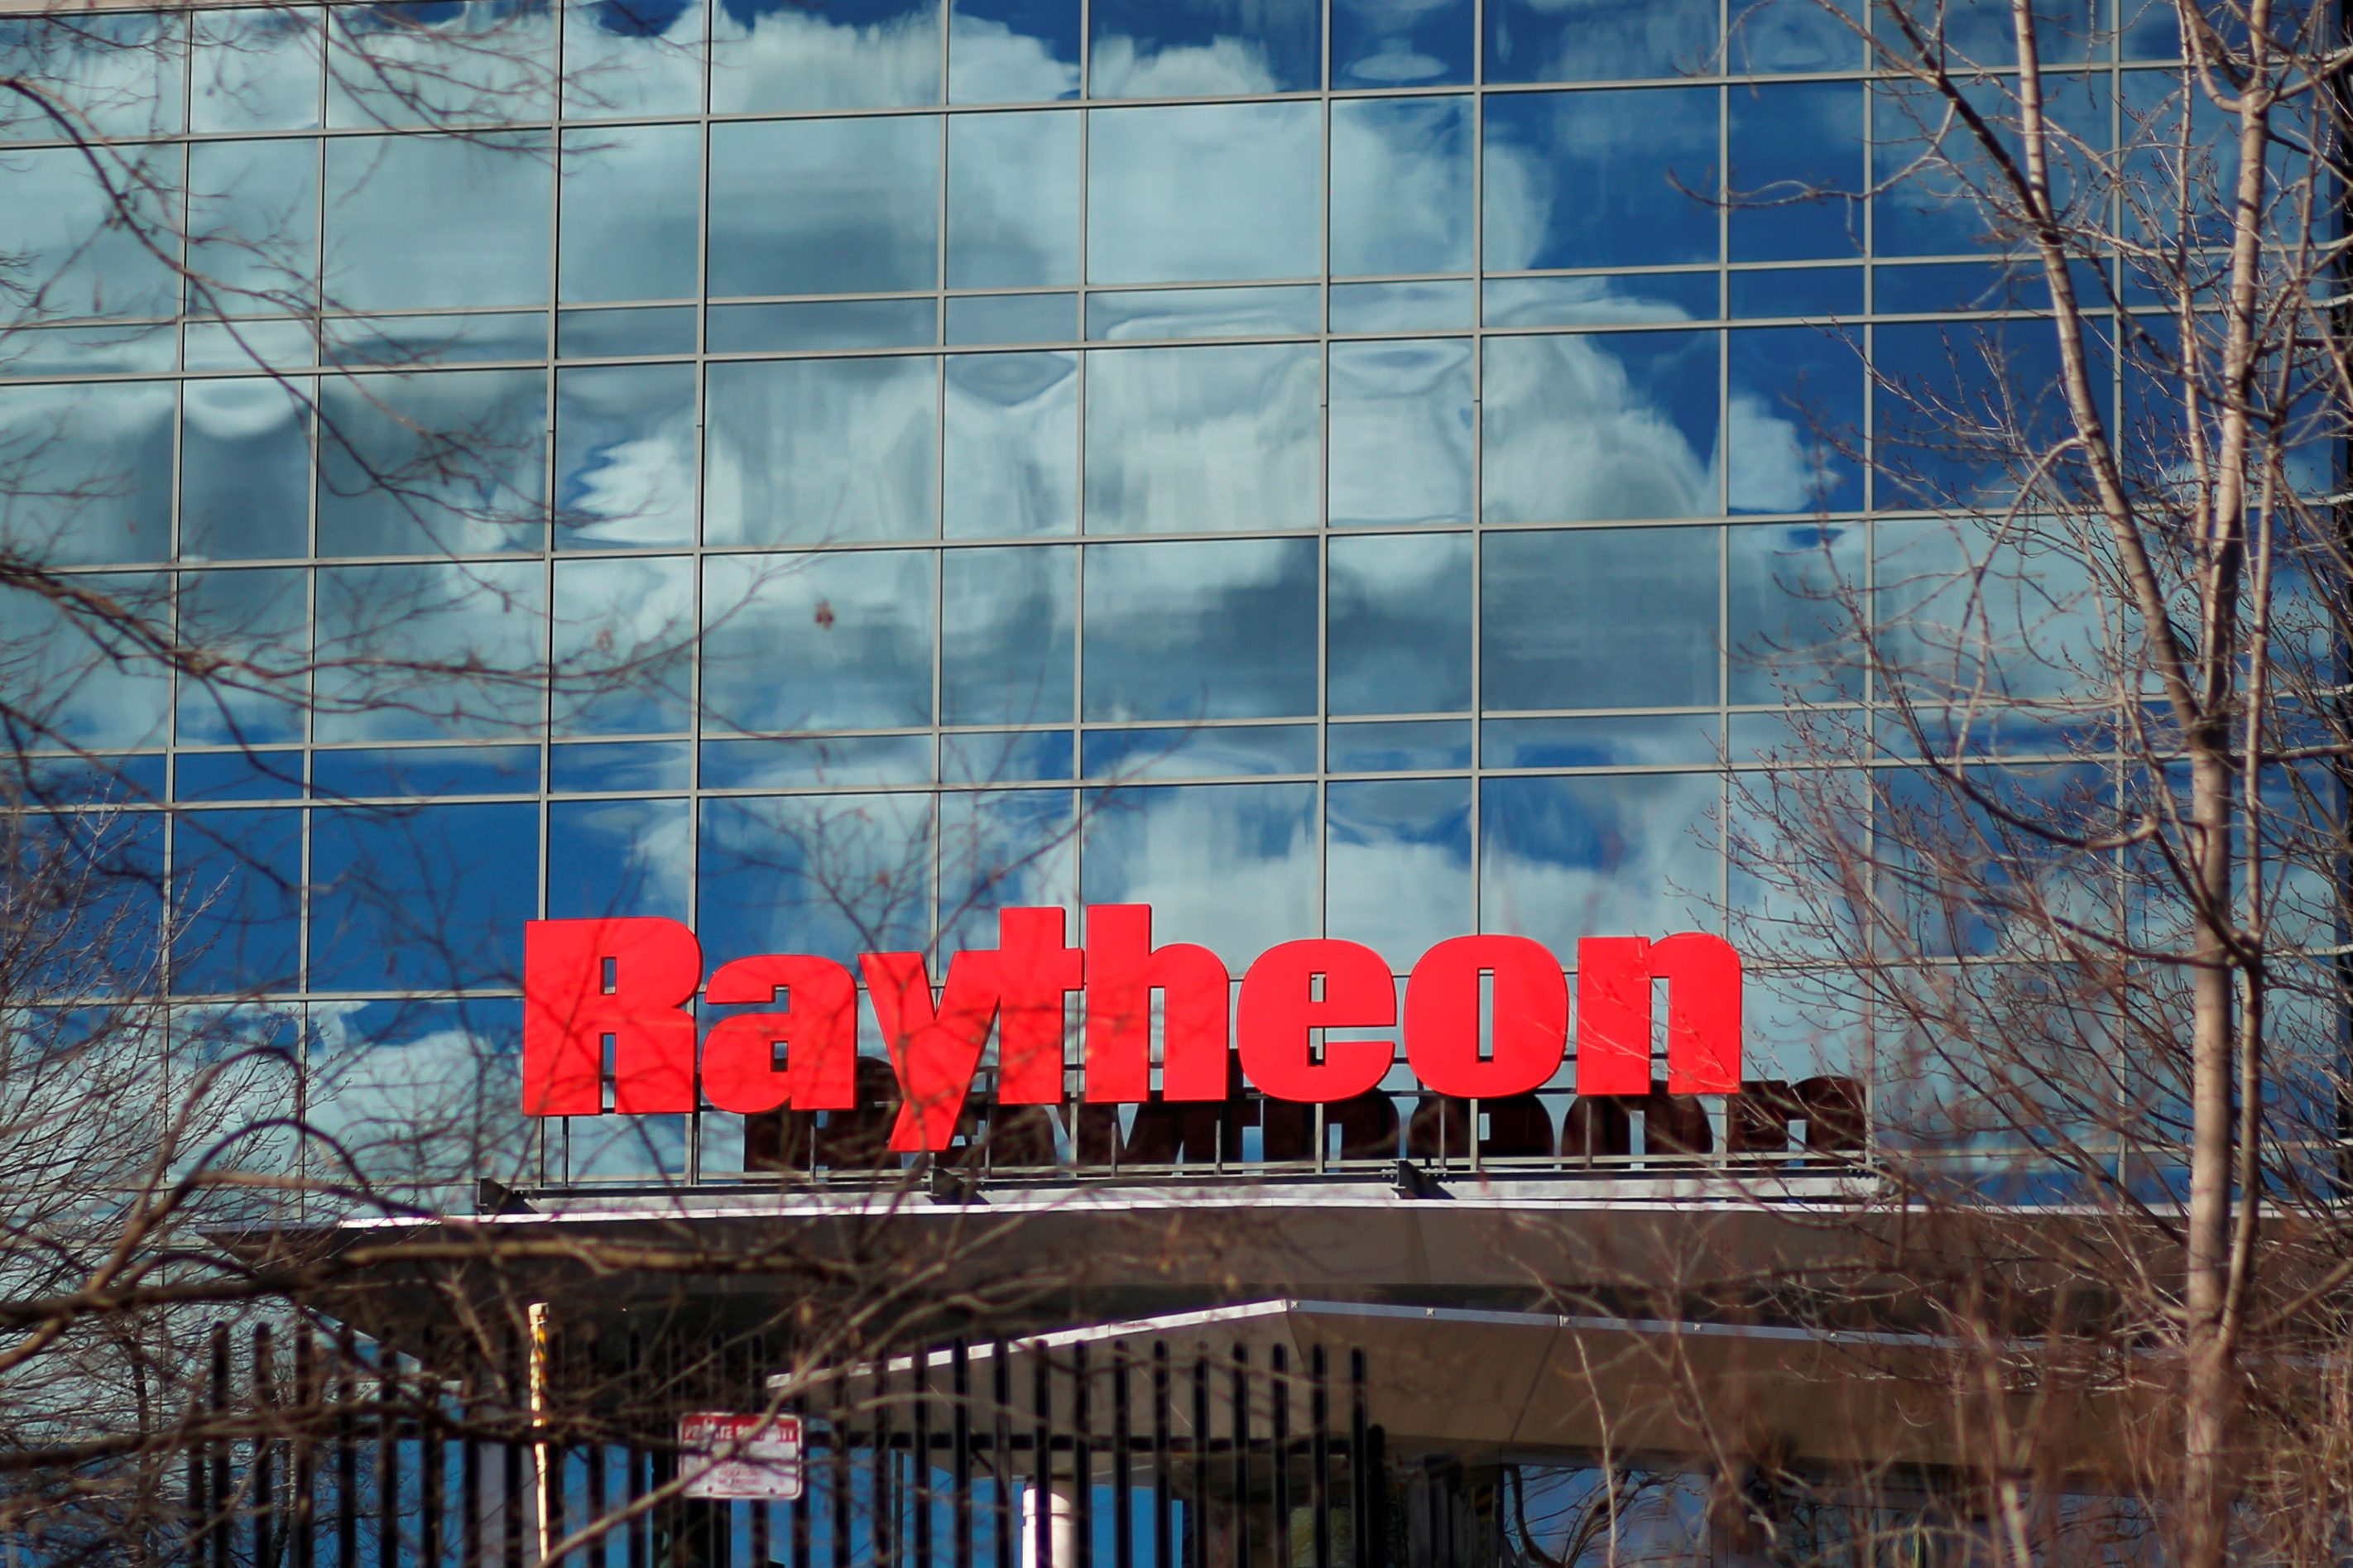 A sign marks the Raytheon offices in Woburn, Massachusetts, U.S. January 25, 2017. REUTERS/Brian Snyder